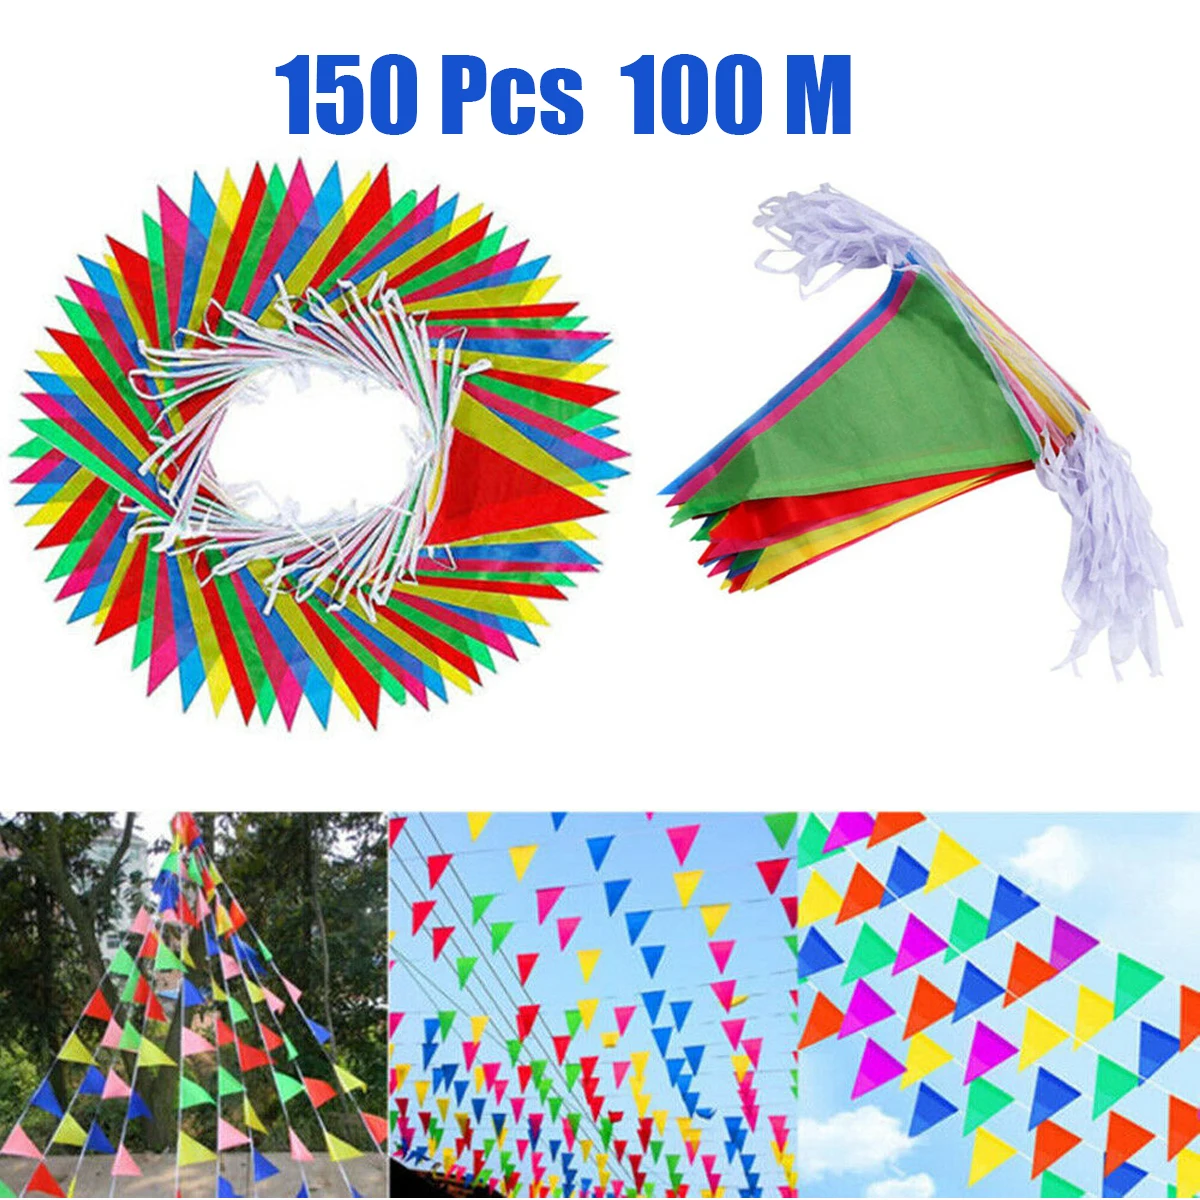 

150 Pcs Colorful Pennant Flags Triangle Bunting 100M Multicolor Banner Festival Outdoor Opening Wedding Party Celebration Decor